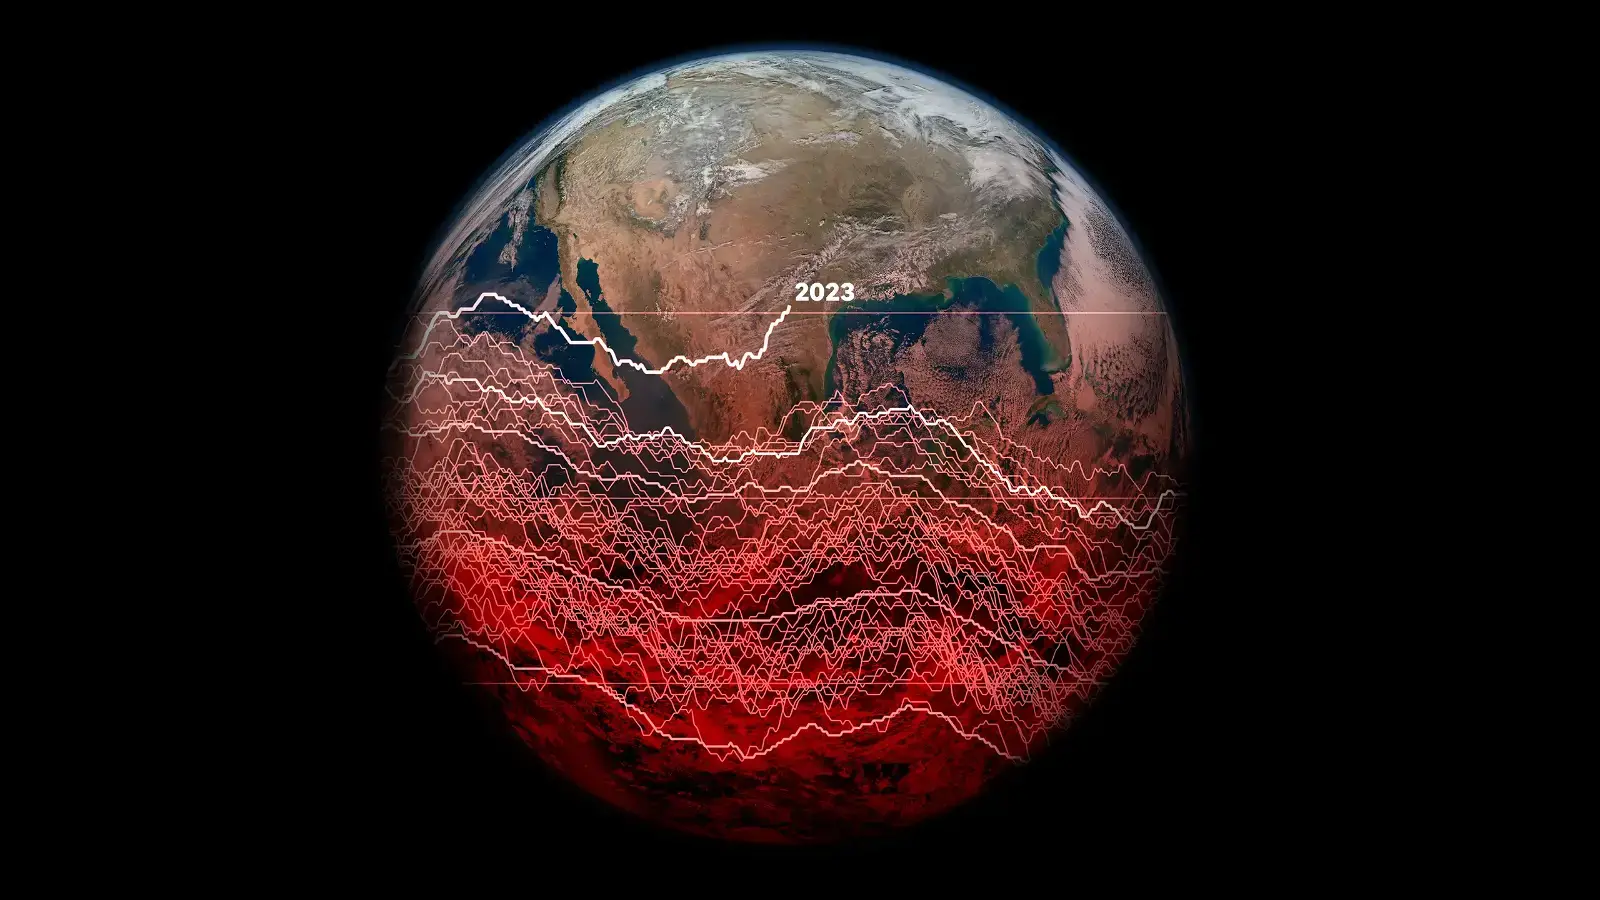 As effects of global warming continue to heat the planet, visualizing climate change's wrath